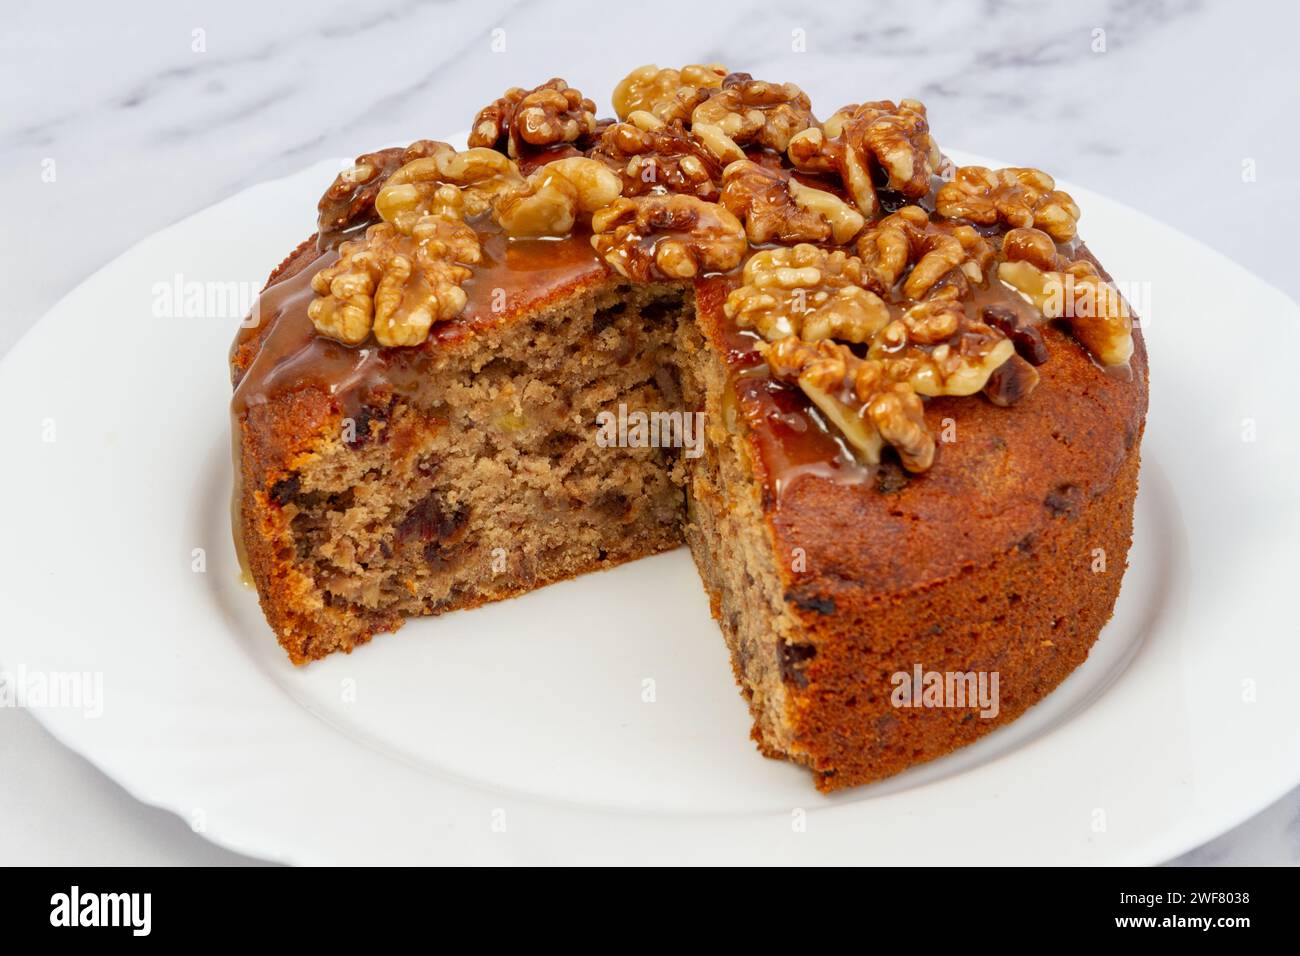 section out of Banana date cake with walnut & honey glaze Stock Photo